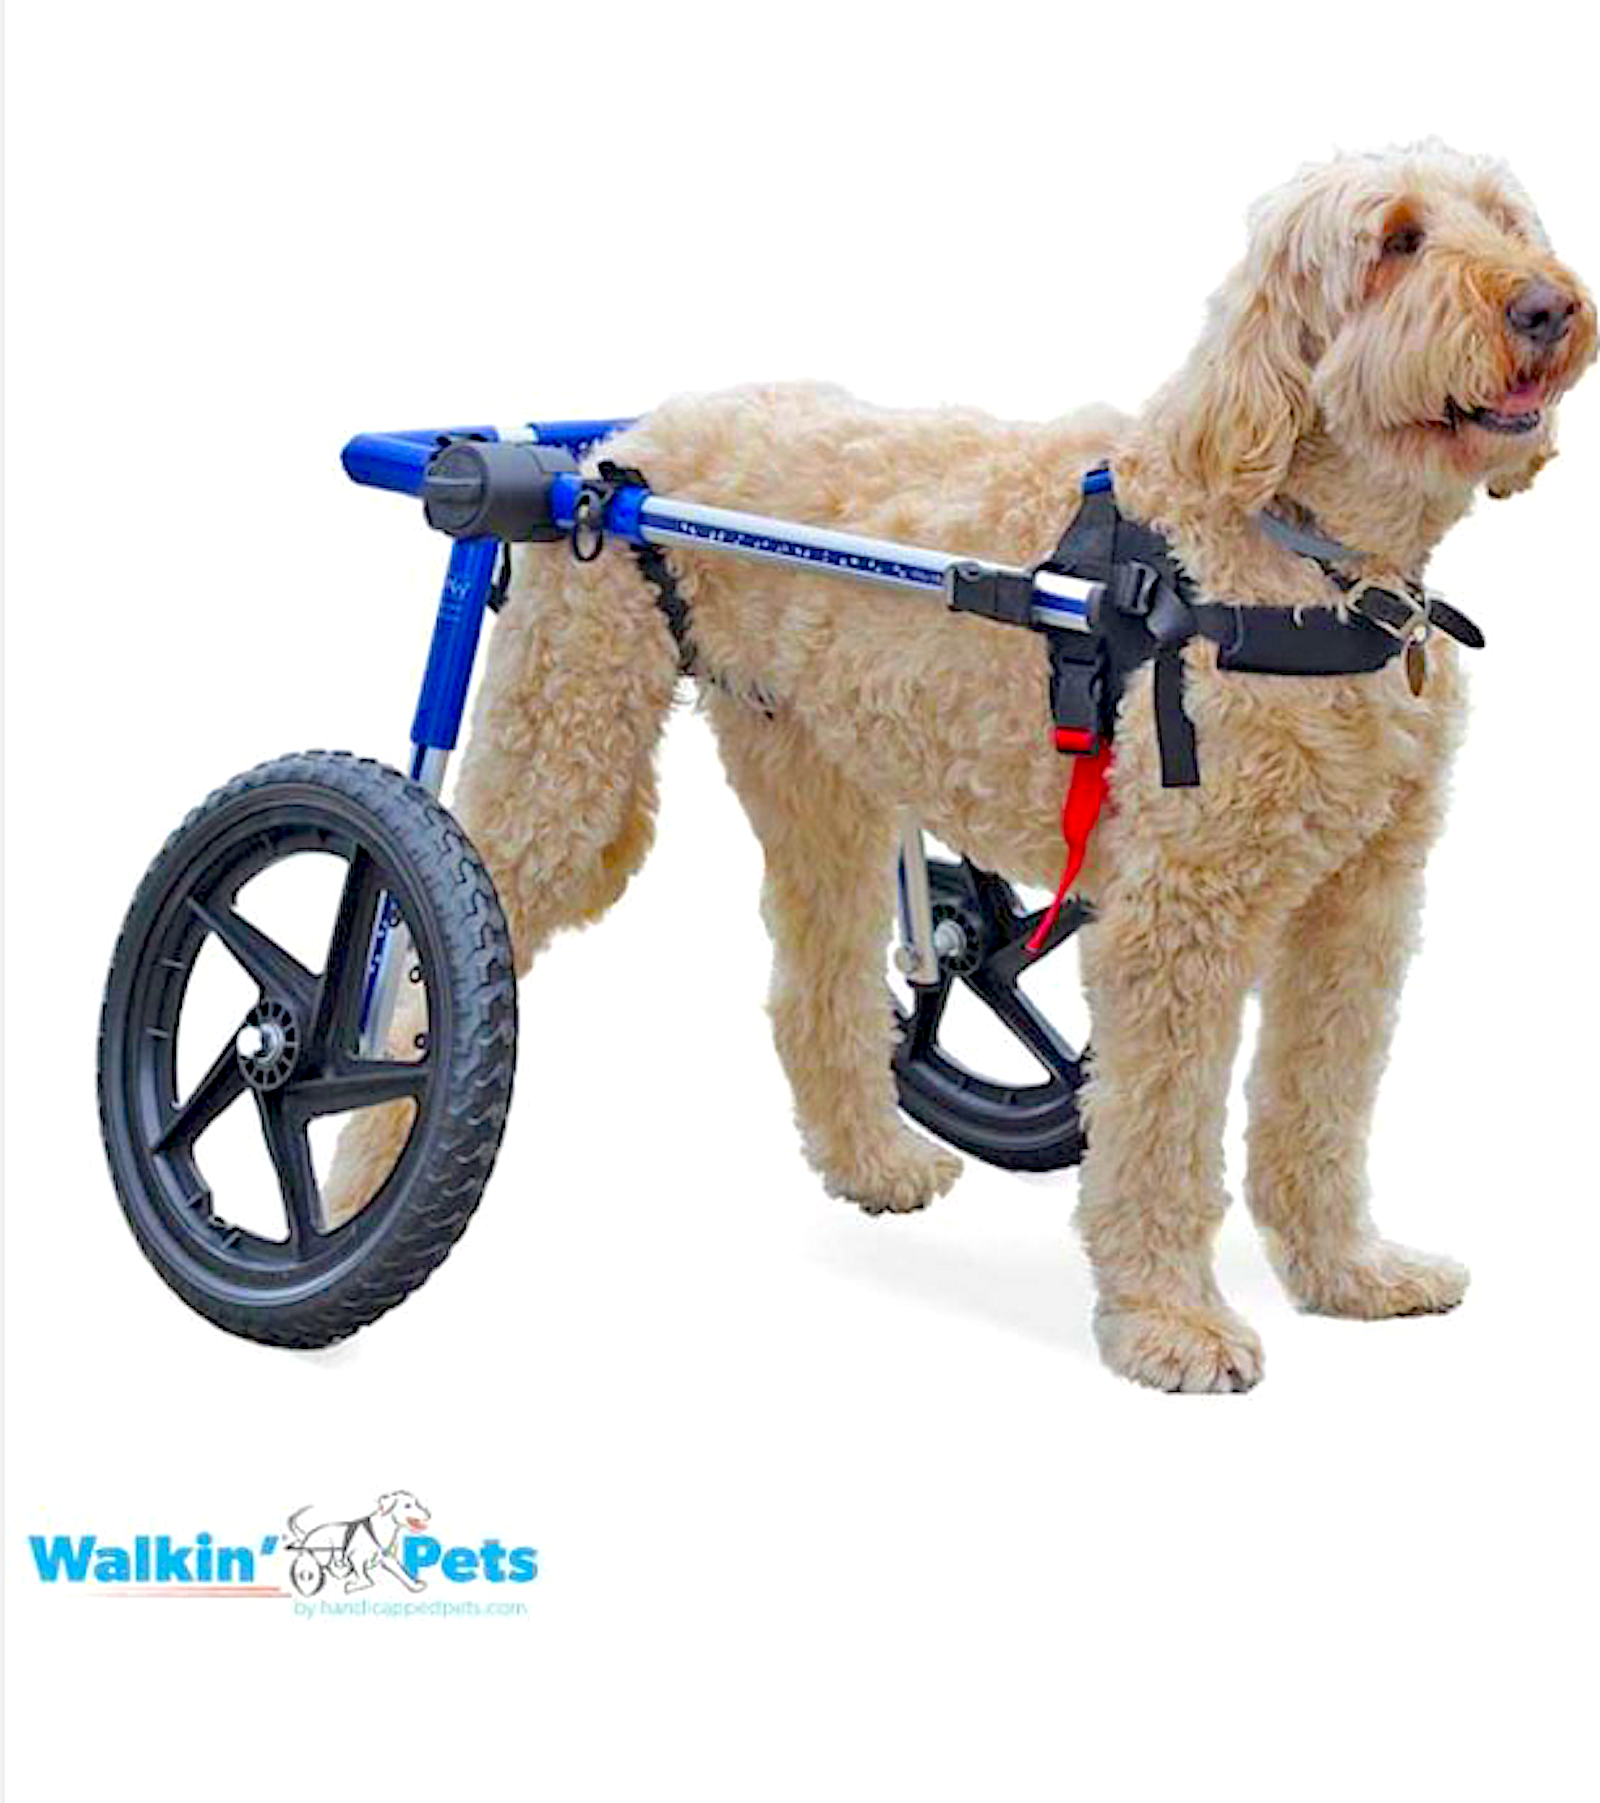 WALKIN' WHEELS: providing a wide variety of fully adjustable carts for every need - Vital Vet